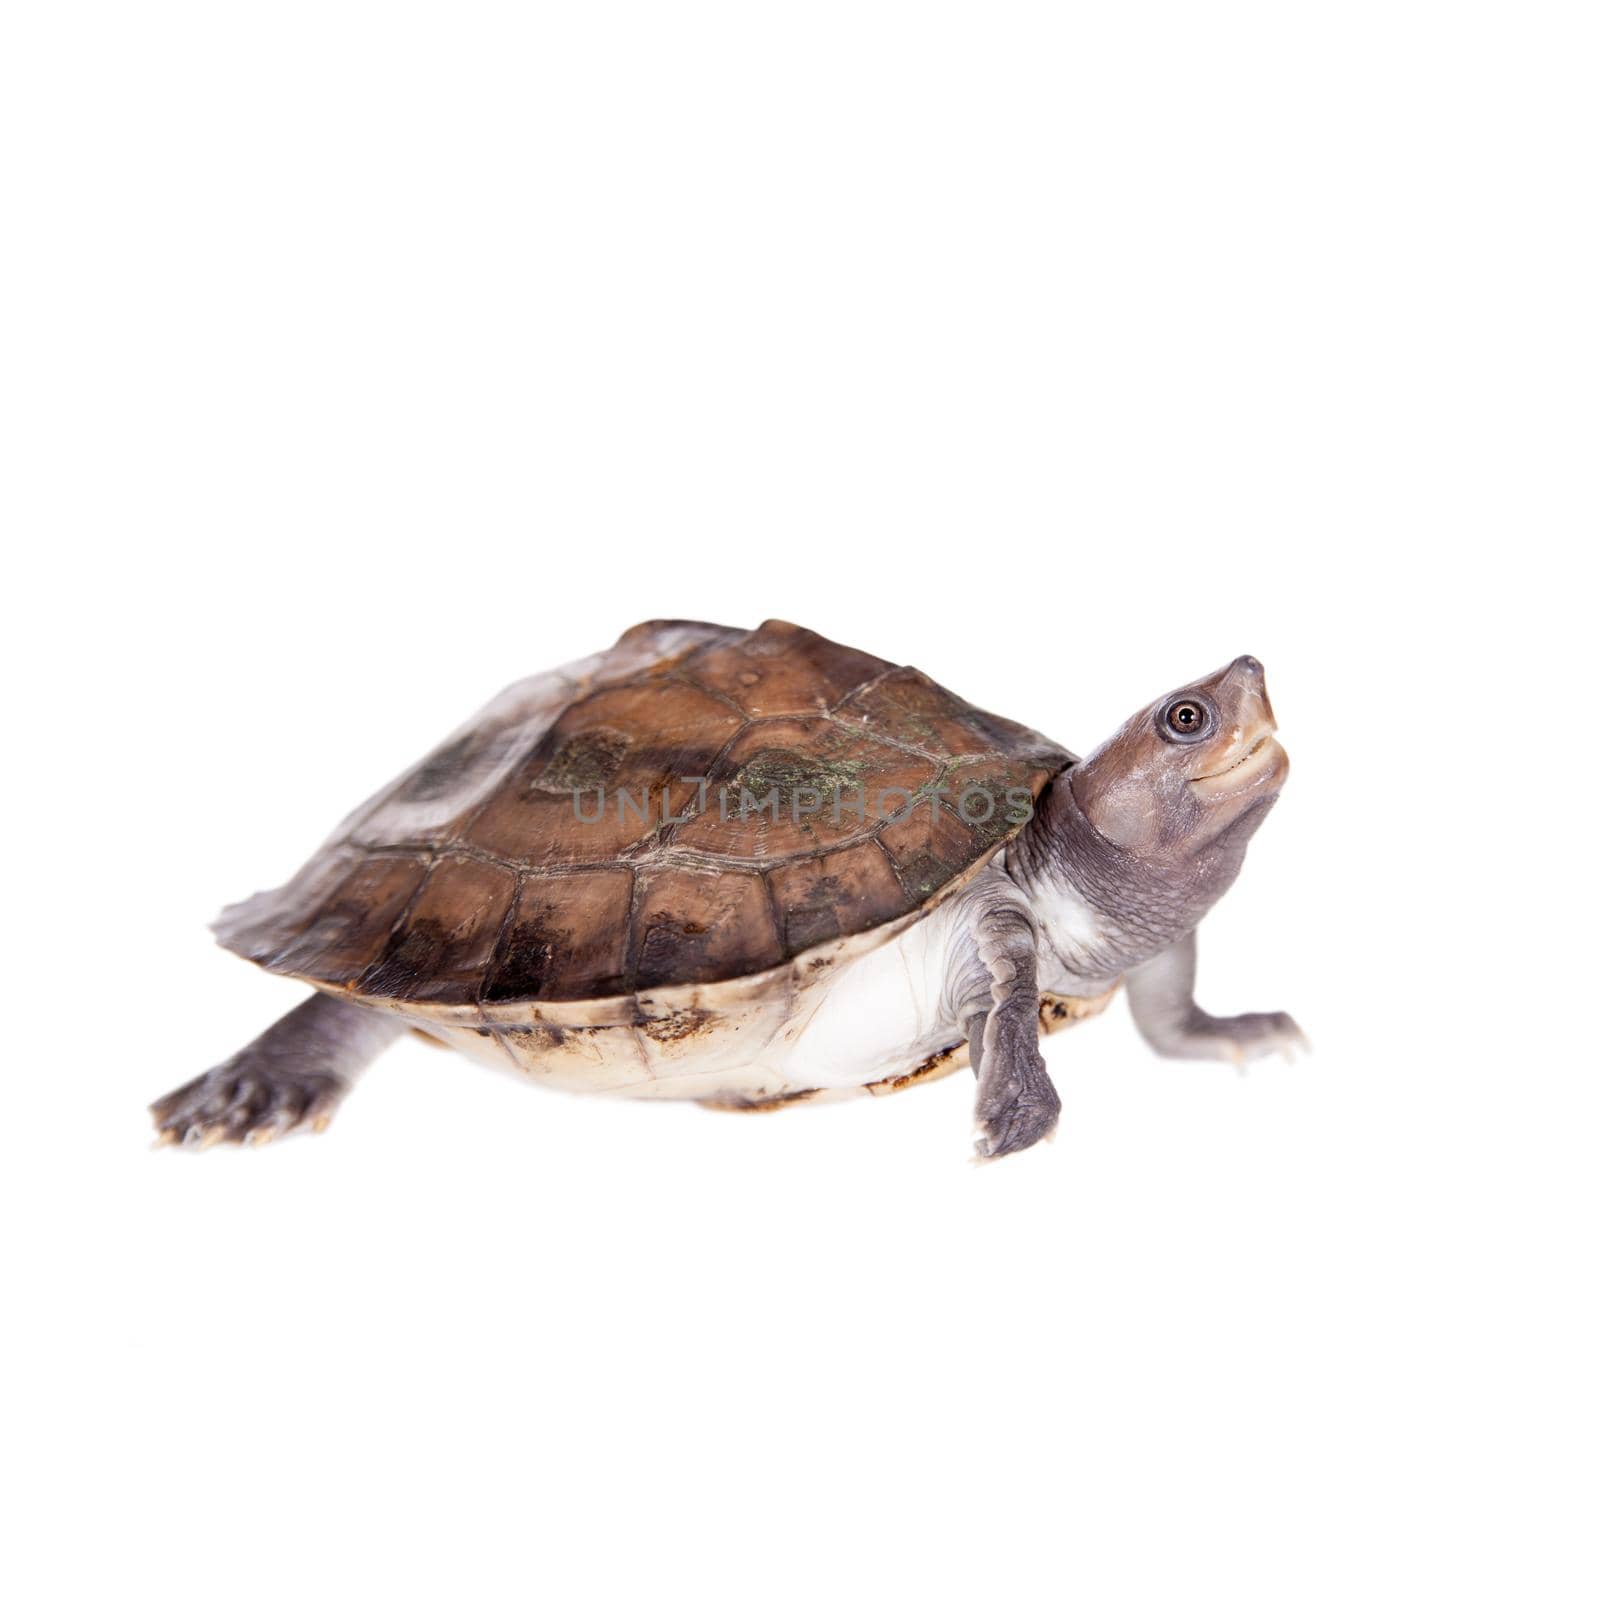 Painted river terrapin, Batagur borneoensis, isolated on white background.